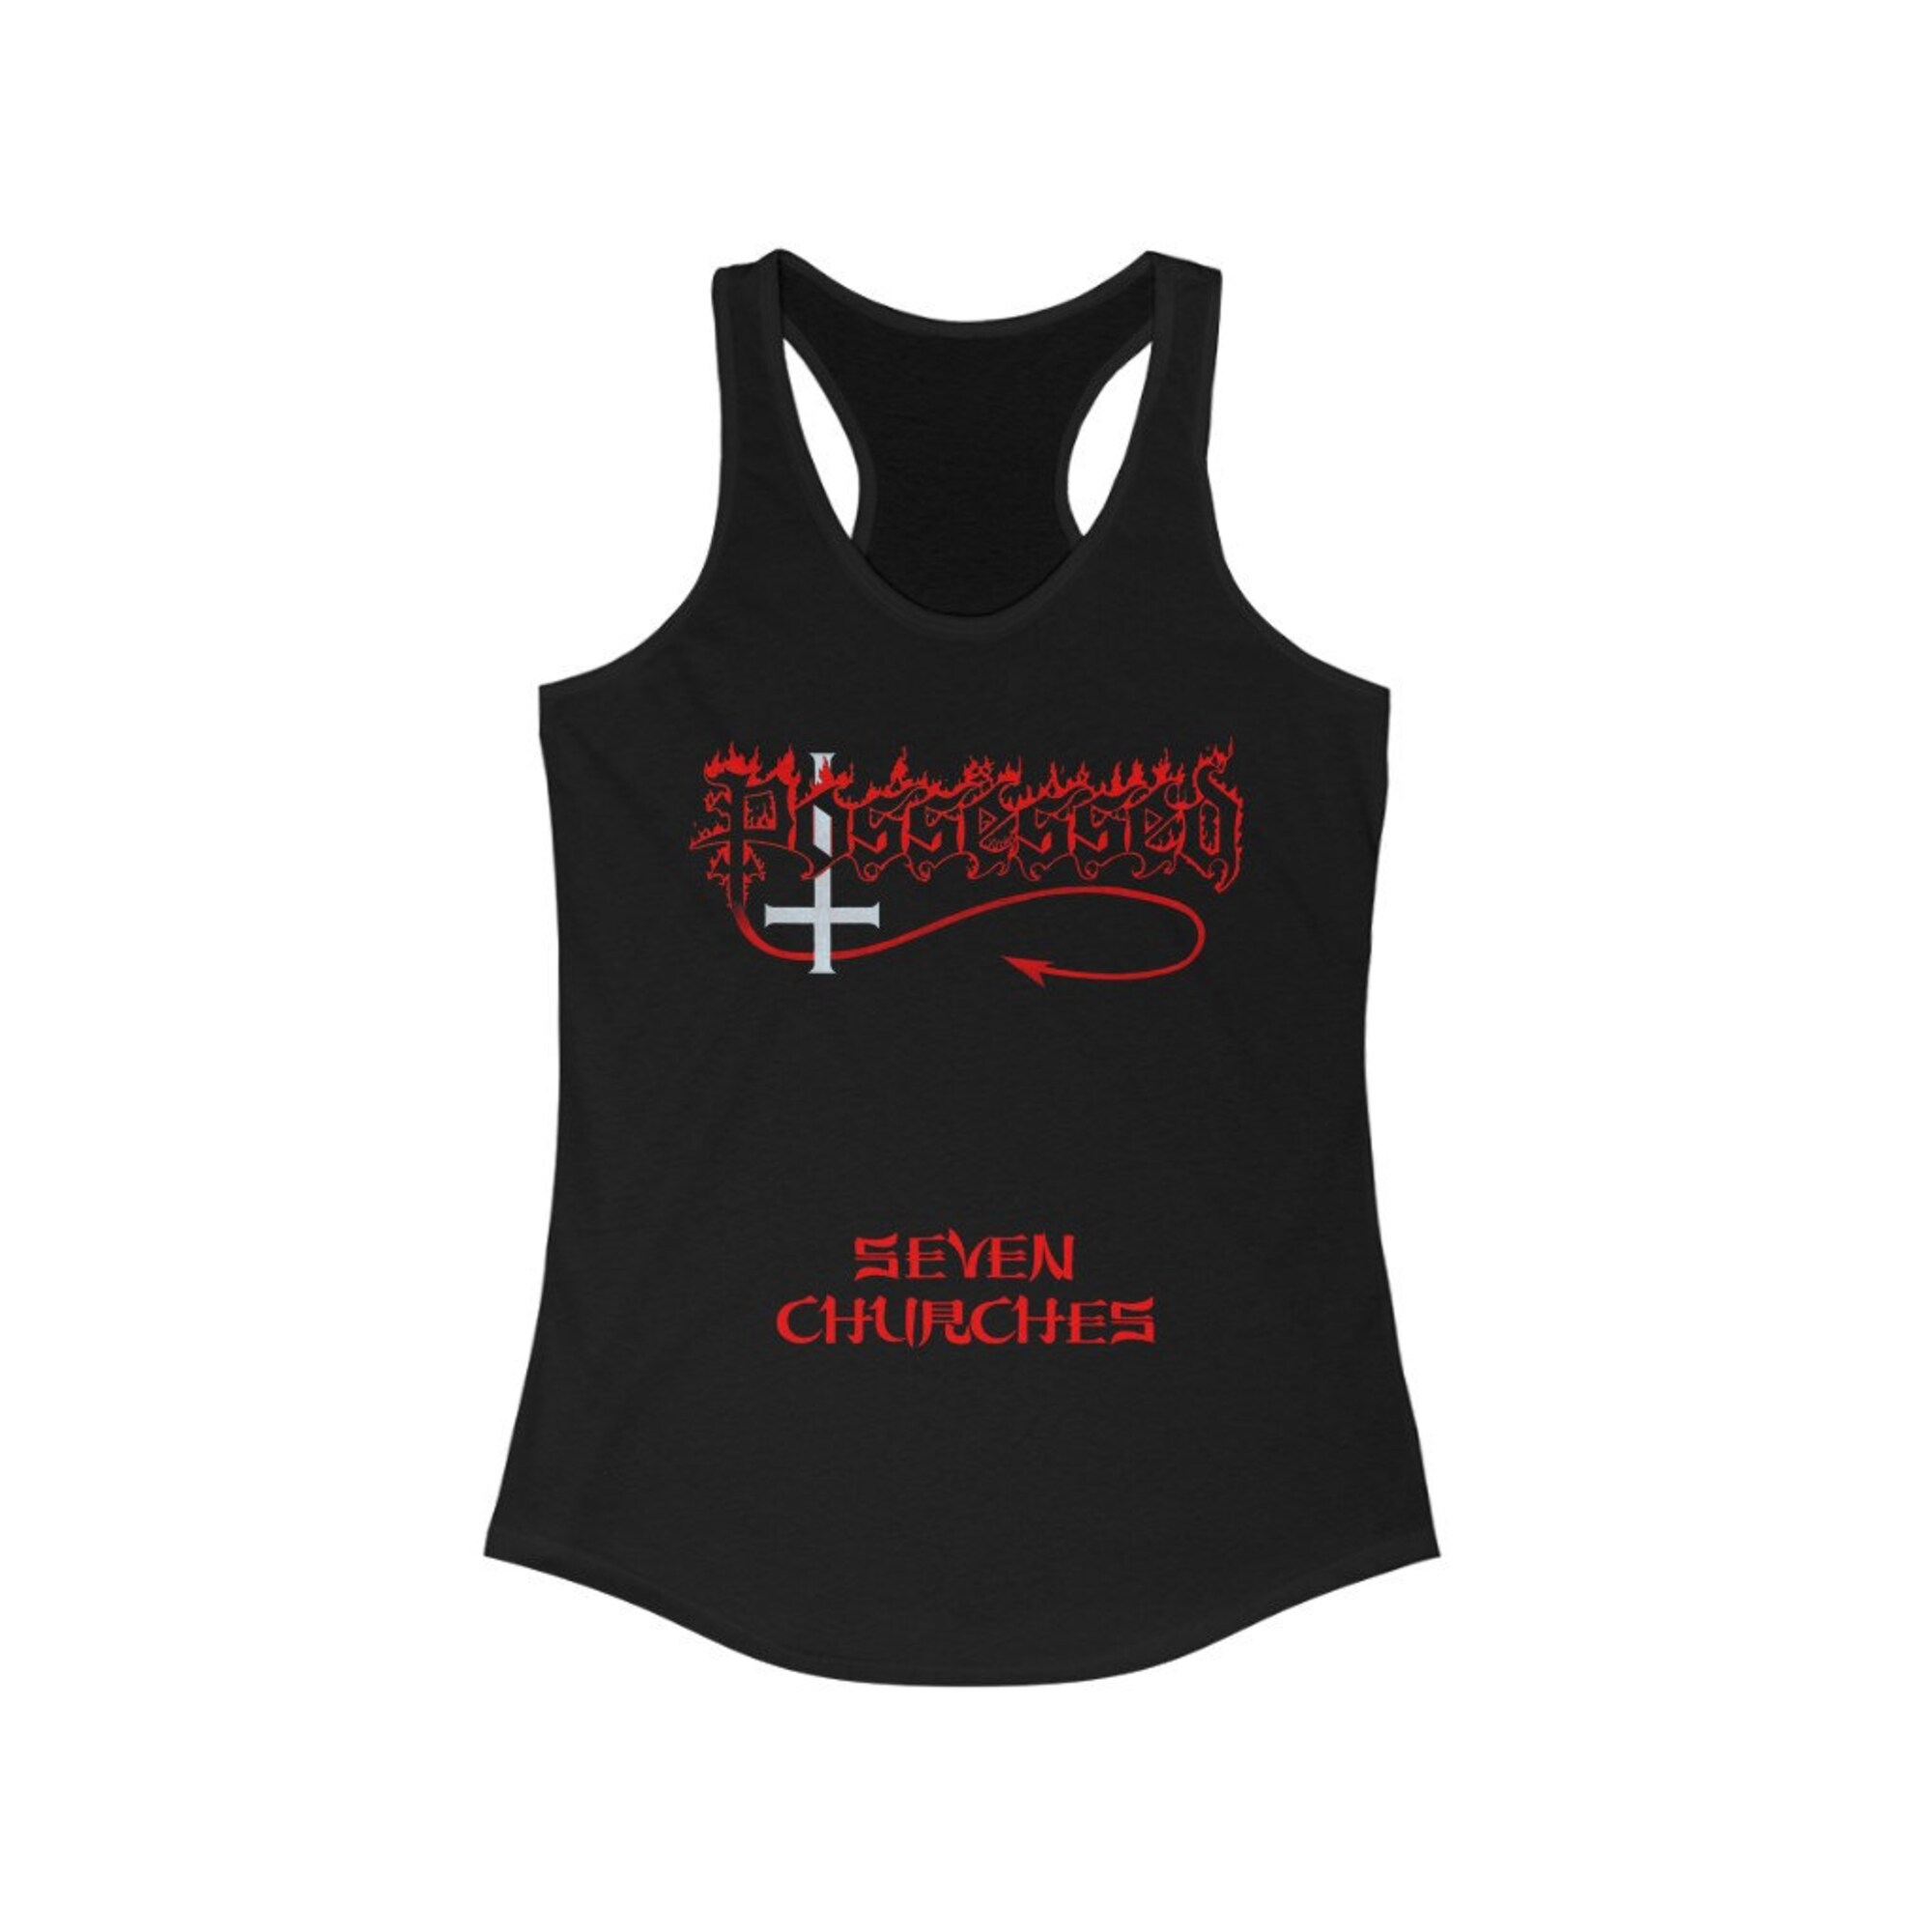 Discover Possessed Sleeveless Tee - Seven Churches Women's Tank Top -  Death Metal Band